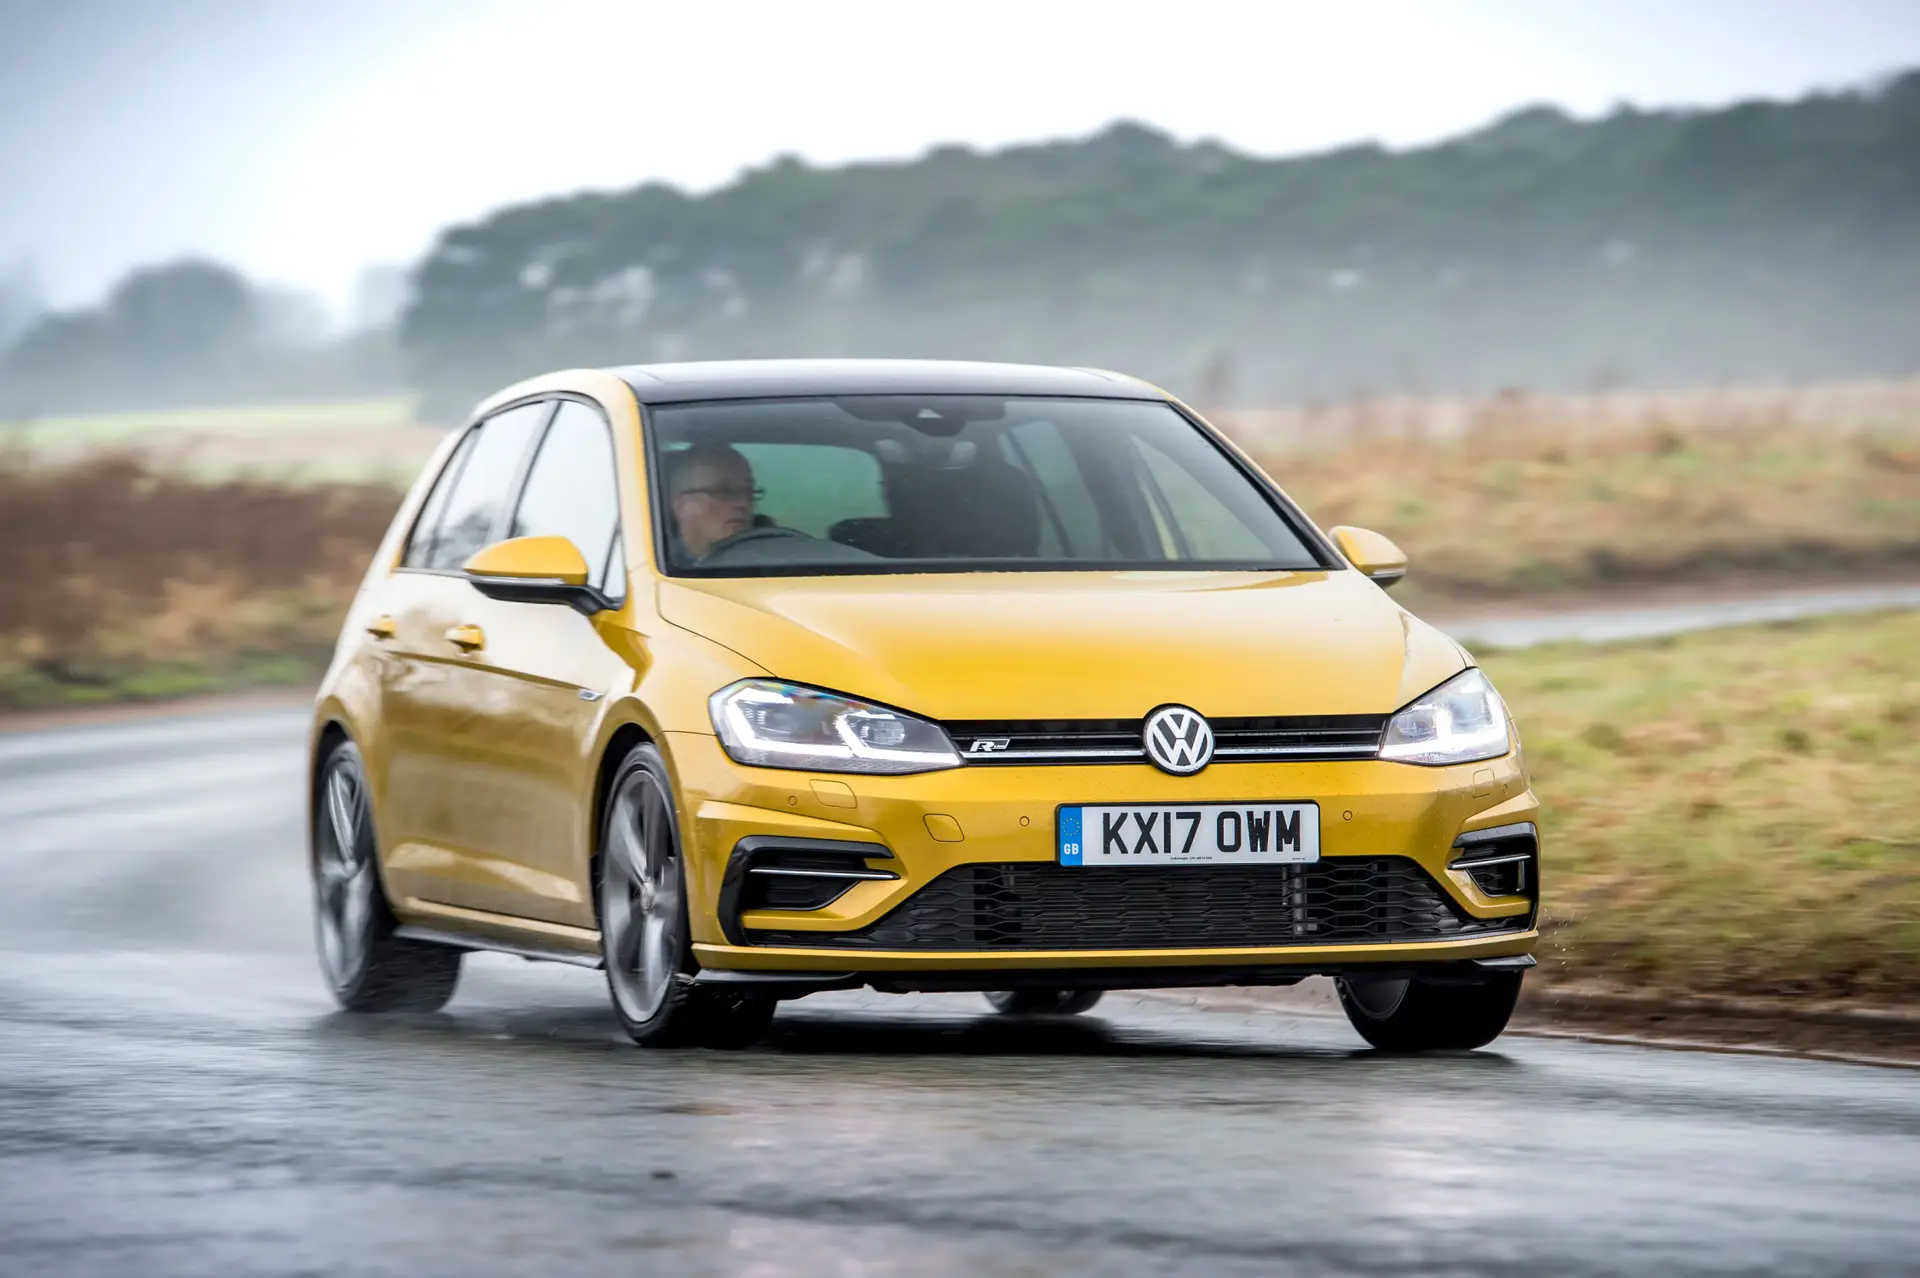 Volkswagen Golf (2013-202) Review: exterior front three quarter photo of the Volkswagen Golf on the road